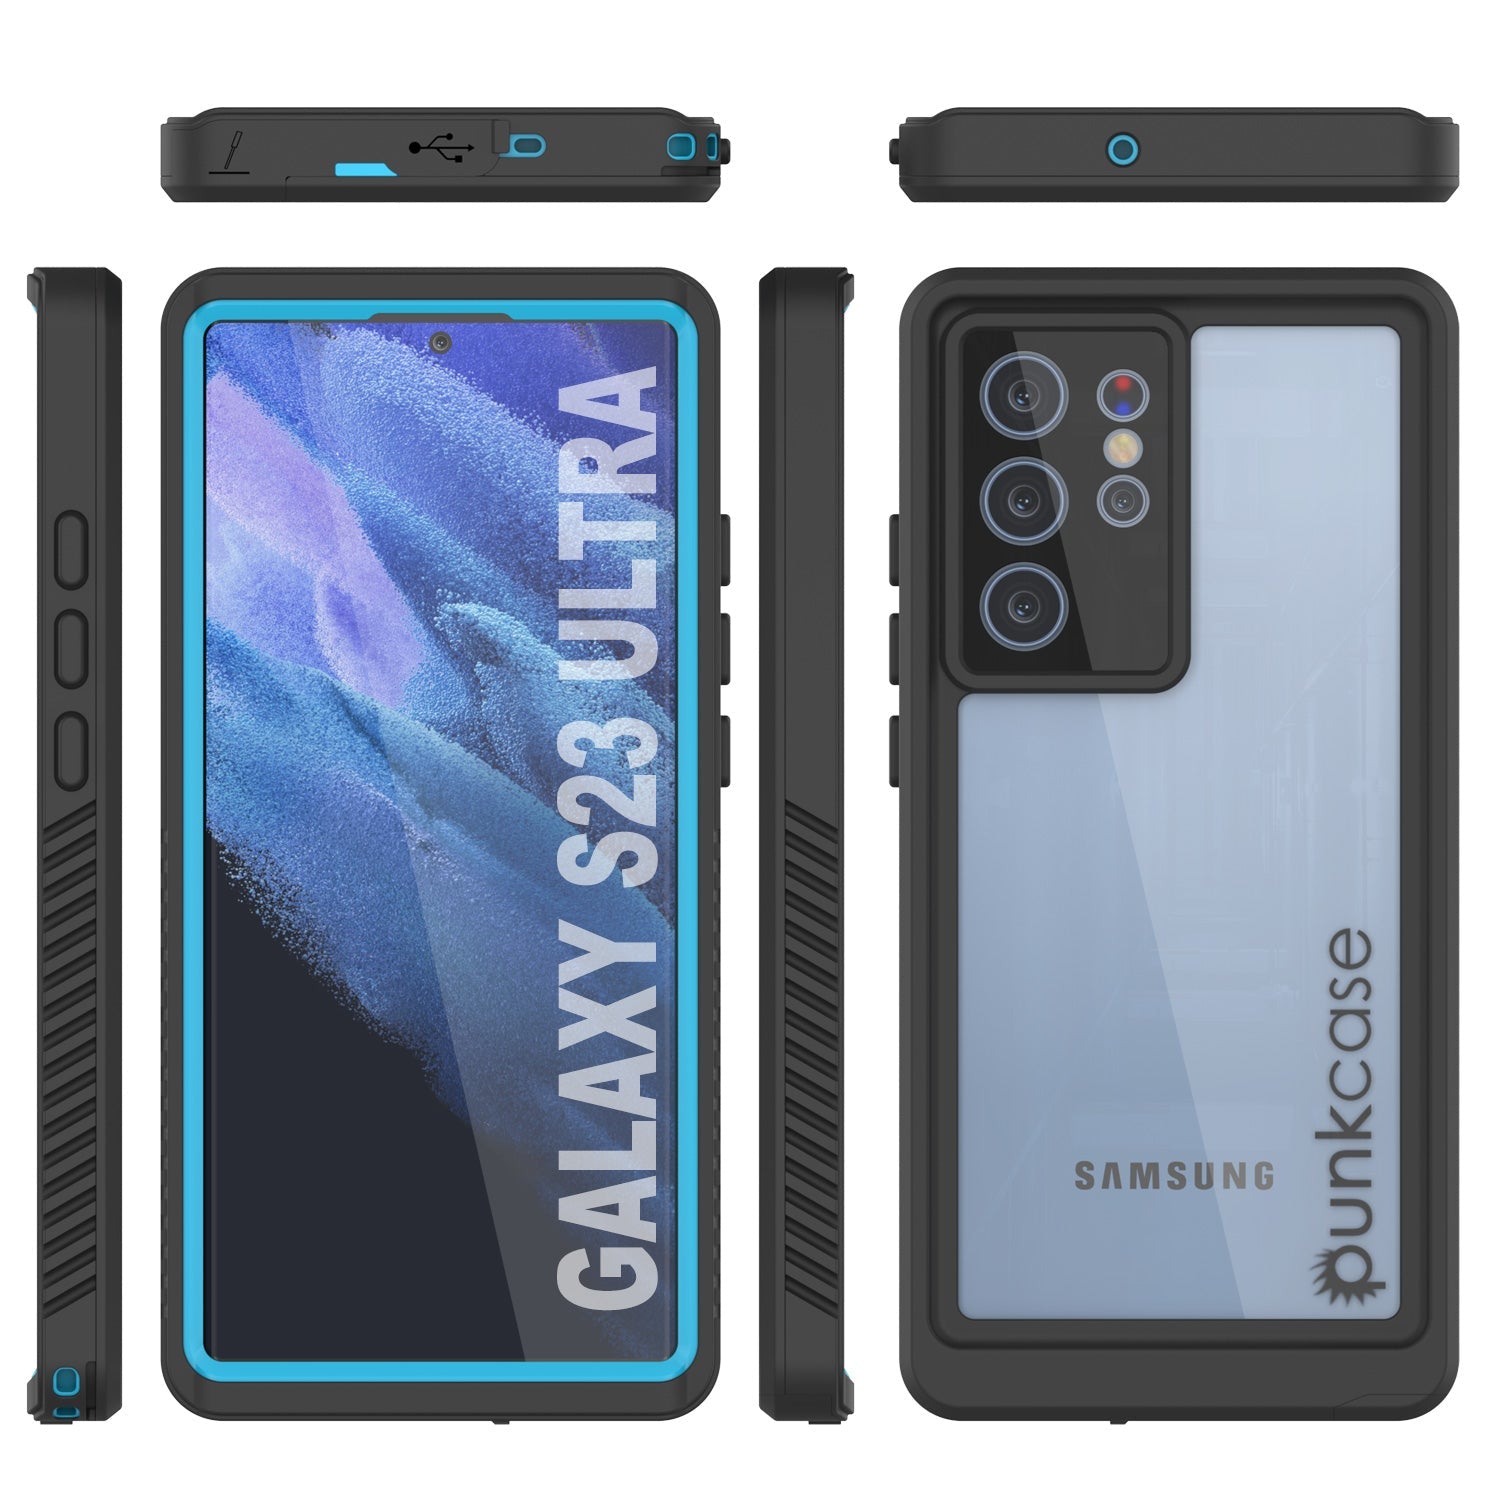 Galaxy S23 Ultra Water/ Shock/ Snow/ dirt proof [Extreme Series] Slim Case [Light Blue]